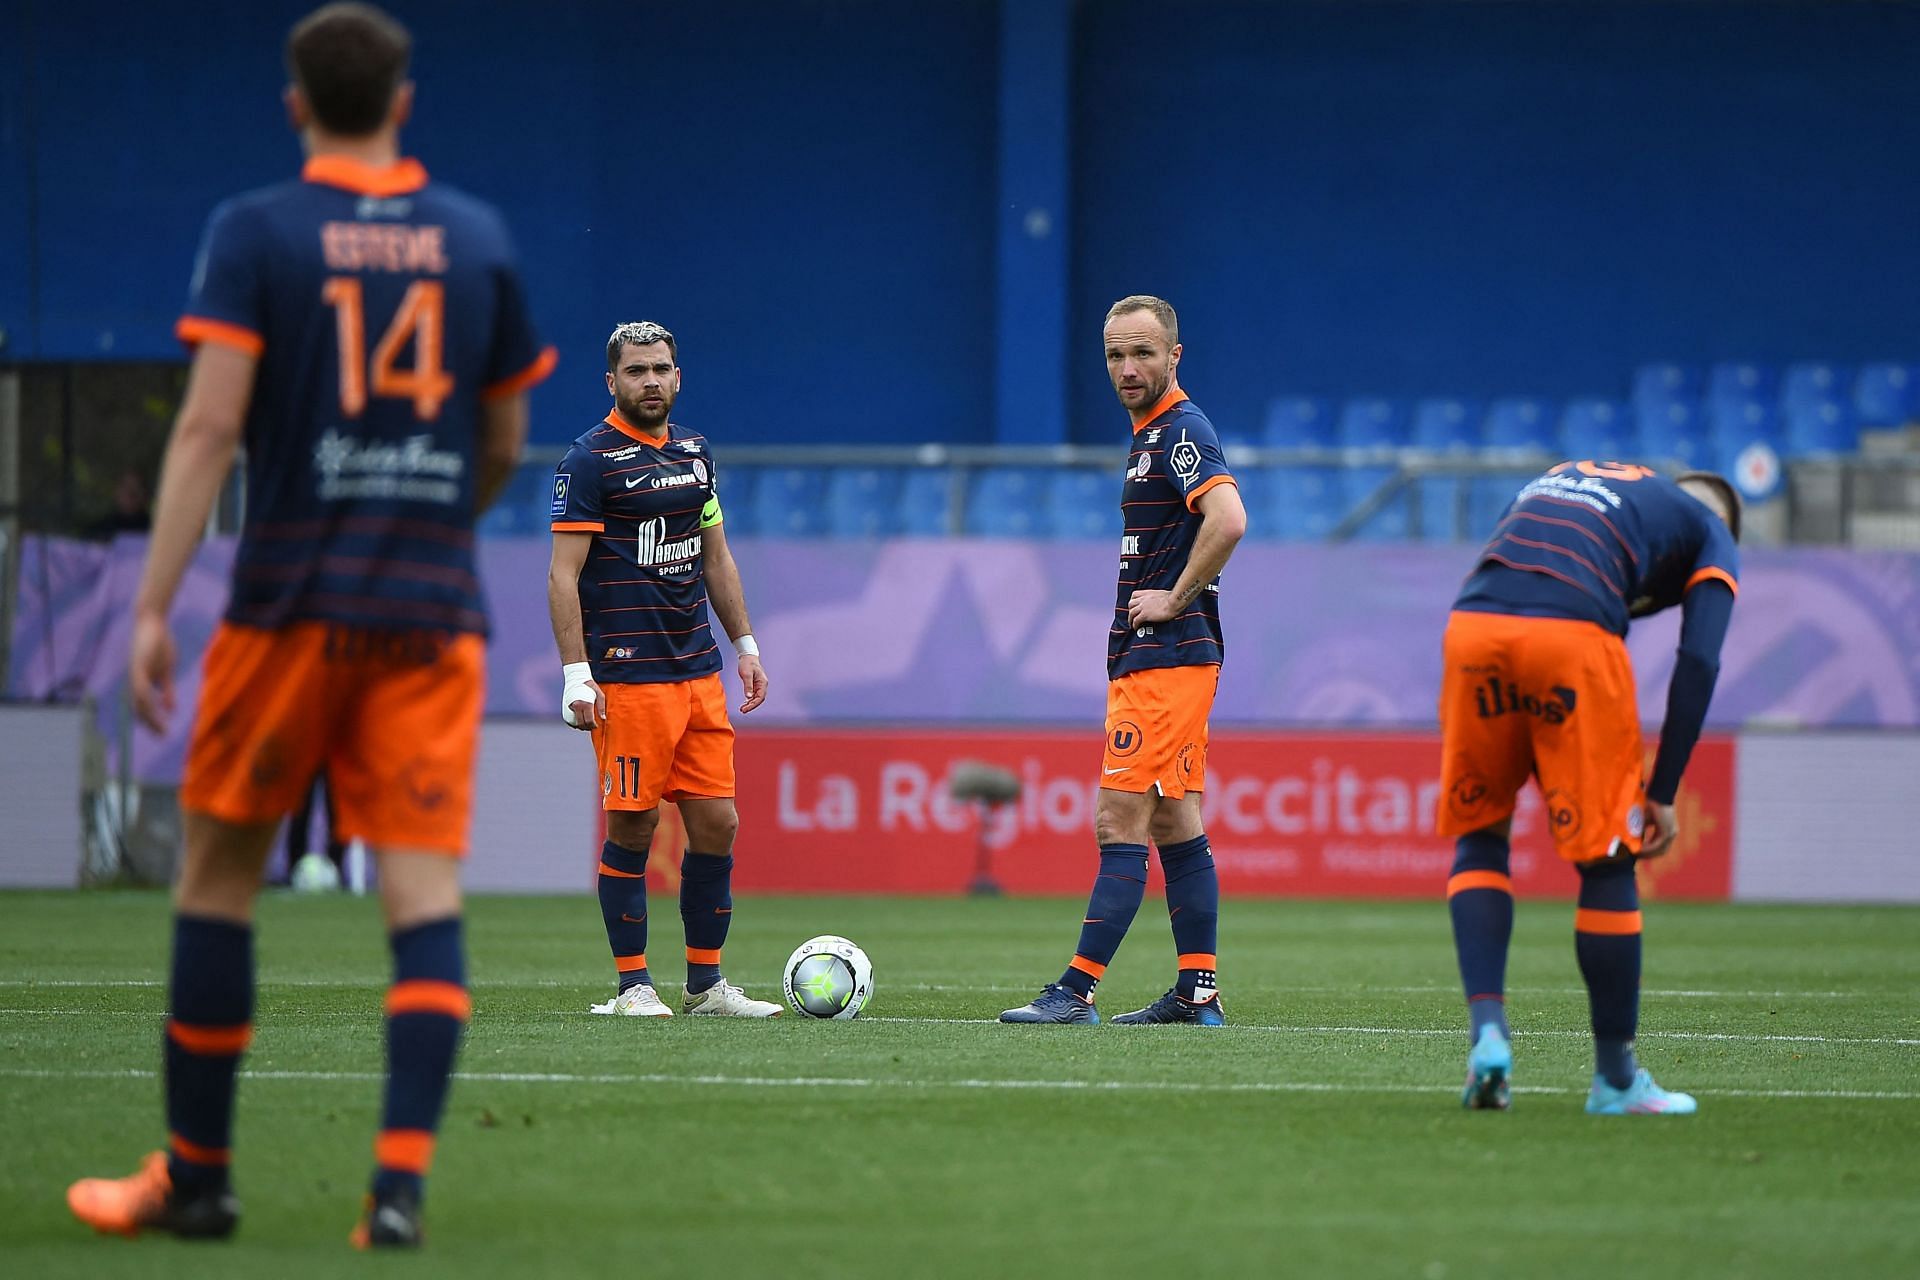 Montpellier will face Brest on Sunday - Ligue 1 